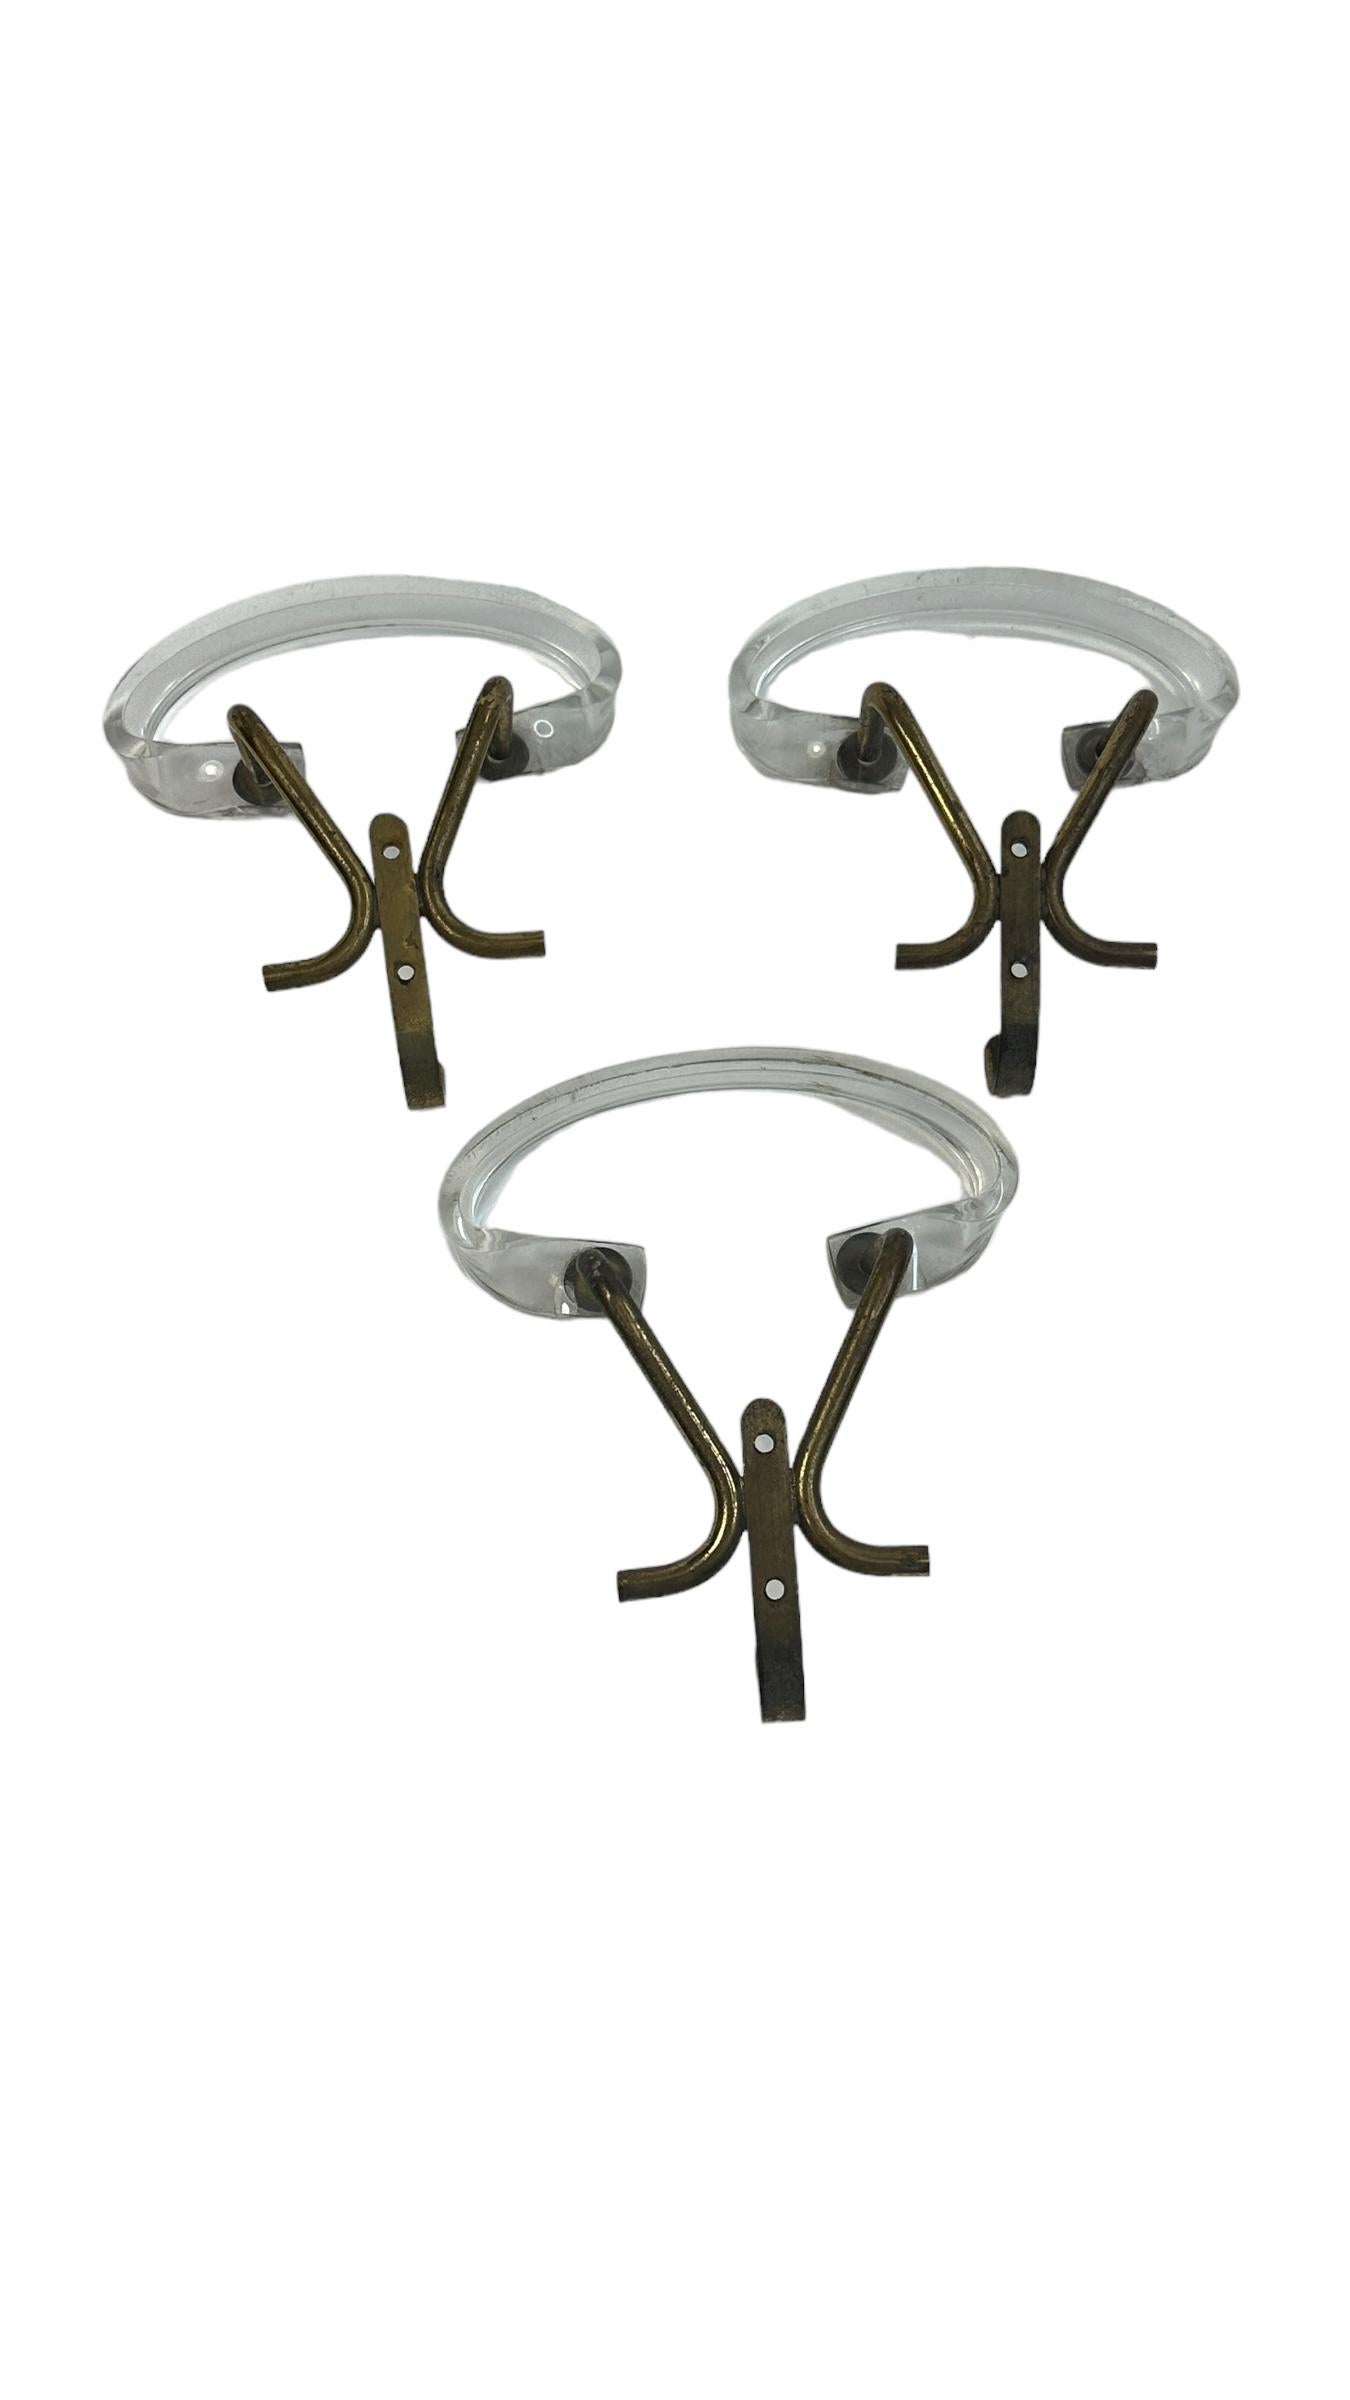 Metal Set of Three Wall Coat Hooks, Lucite and Brass, Mid-Century Modern, 1960s For Sale